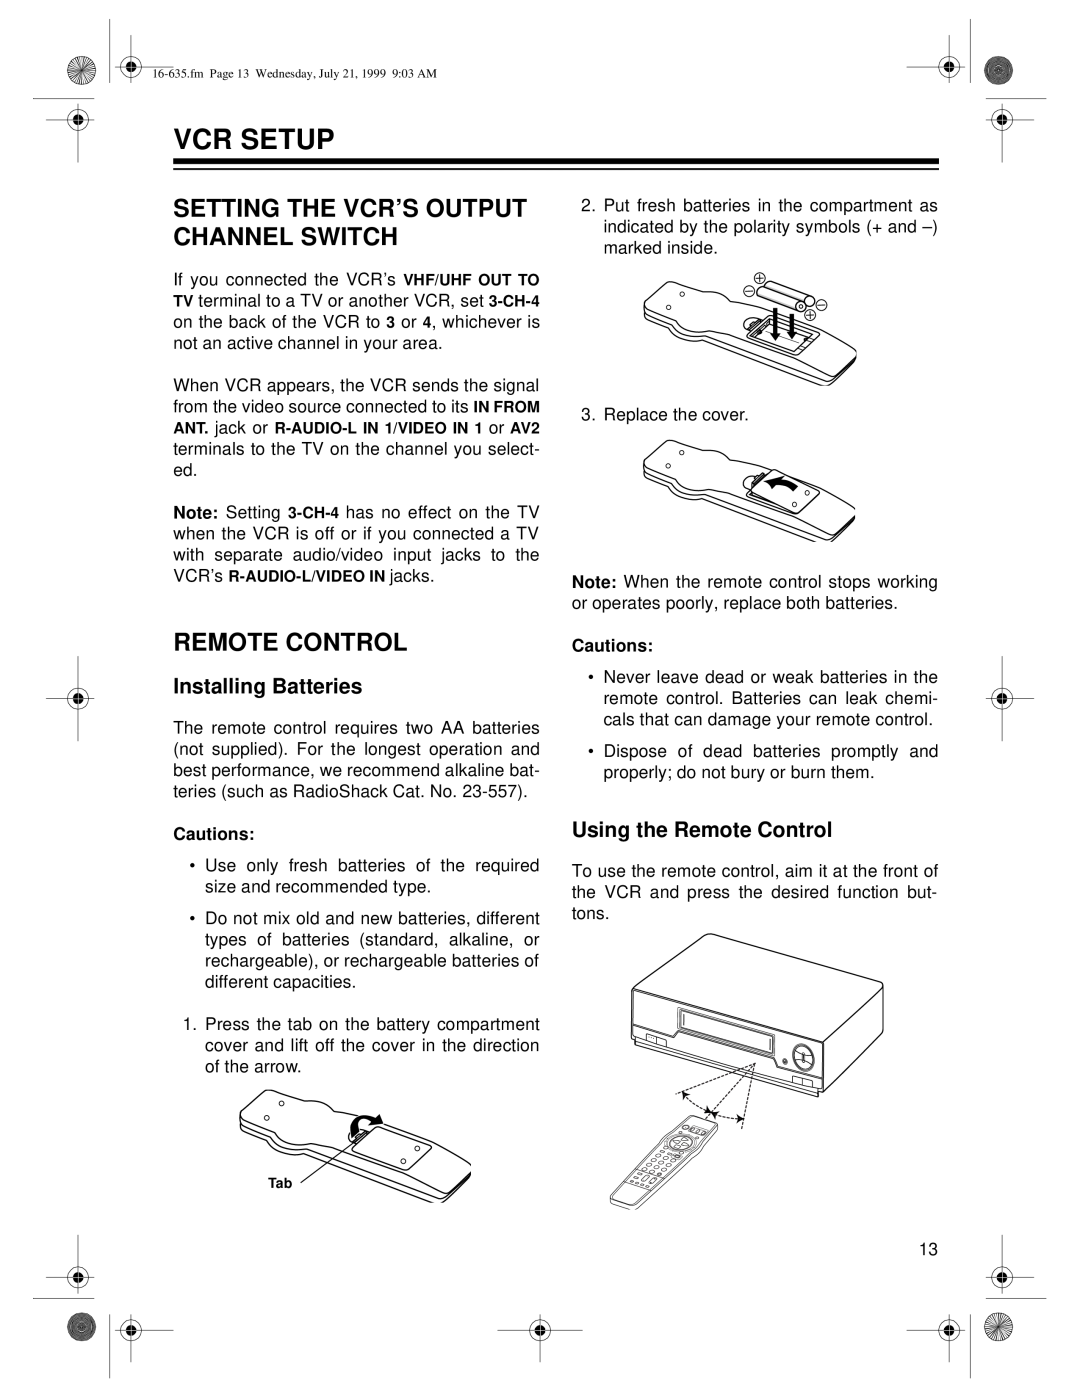 Radio Shack 66 owner manual Vcr Setup, Setting The Vcr’S Output Channel Switch, Remote Control, Installing Batteries 